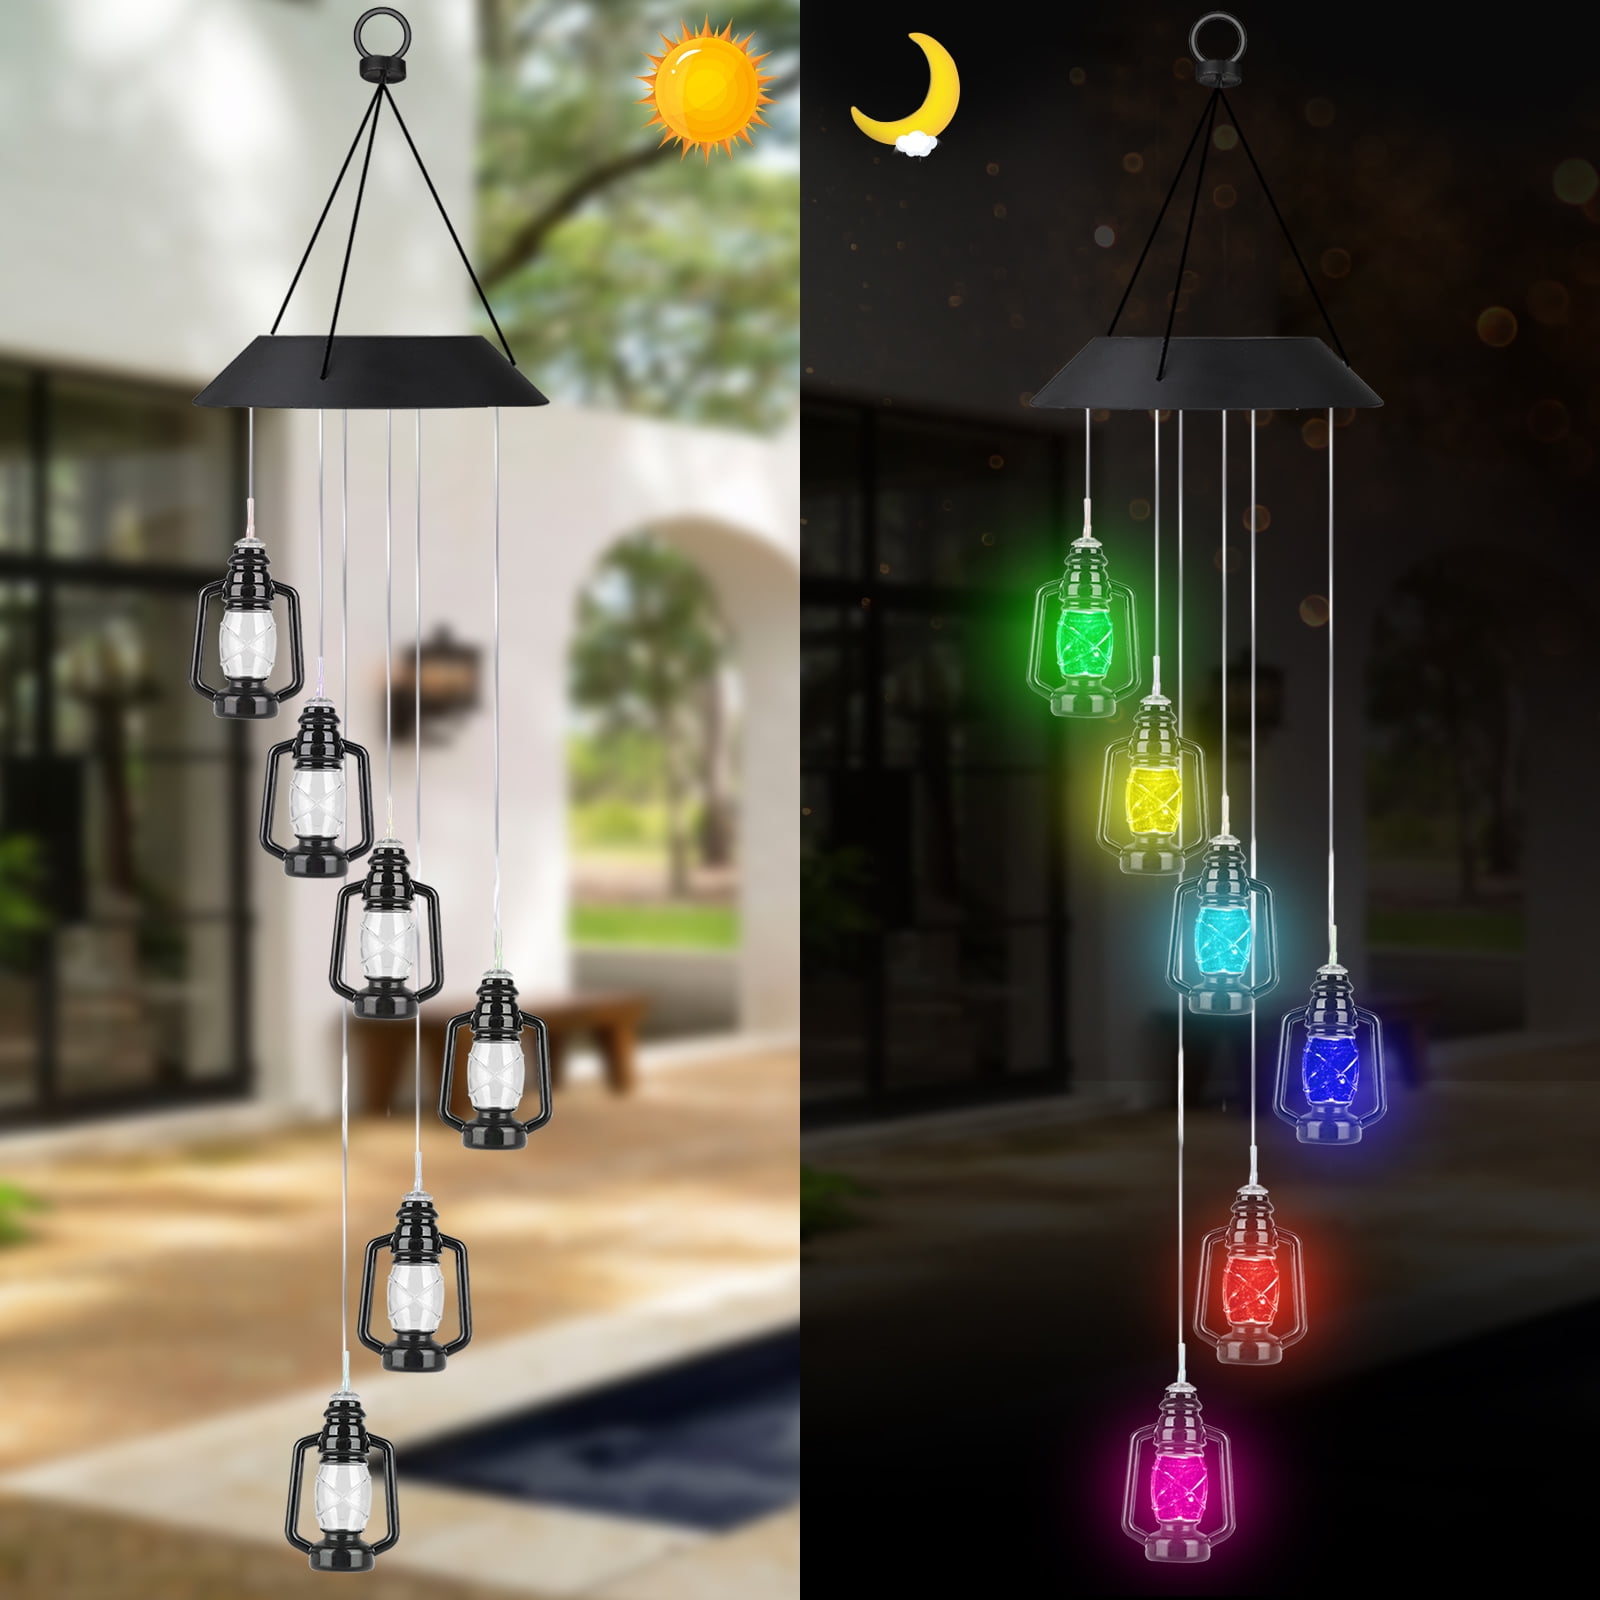 Outdoor Solar Powered LED Colour Changing Spiral Lamp Garden Hanging Light Decor 